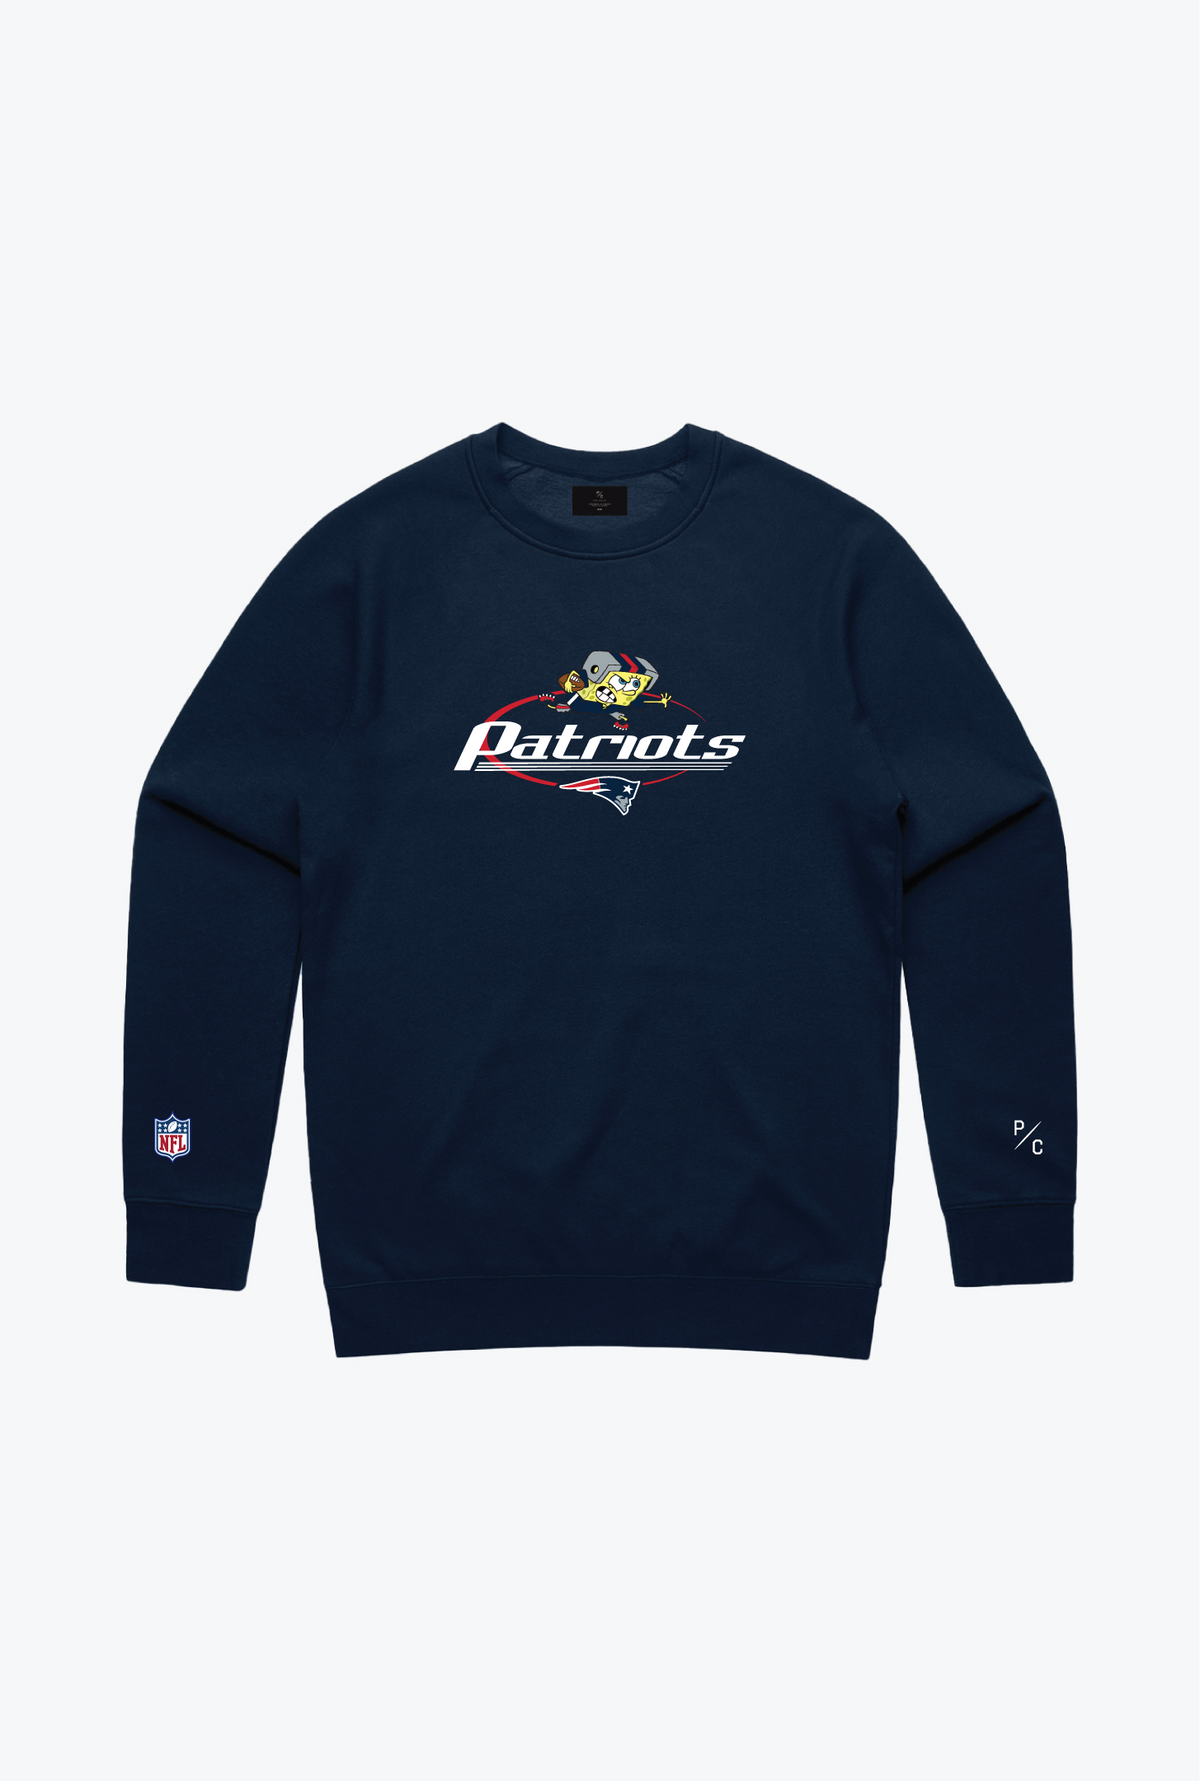 NFL x Nickelodeon Embroidered Crewneck - New England Patriots